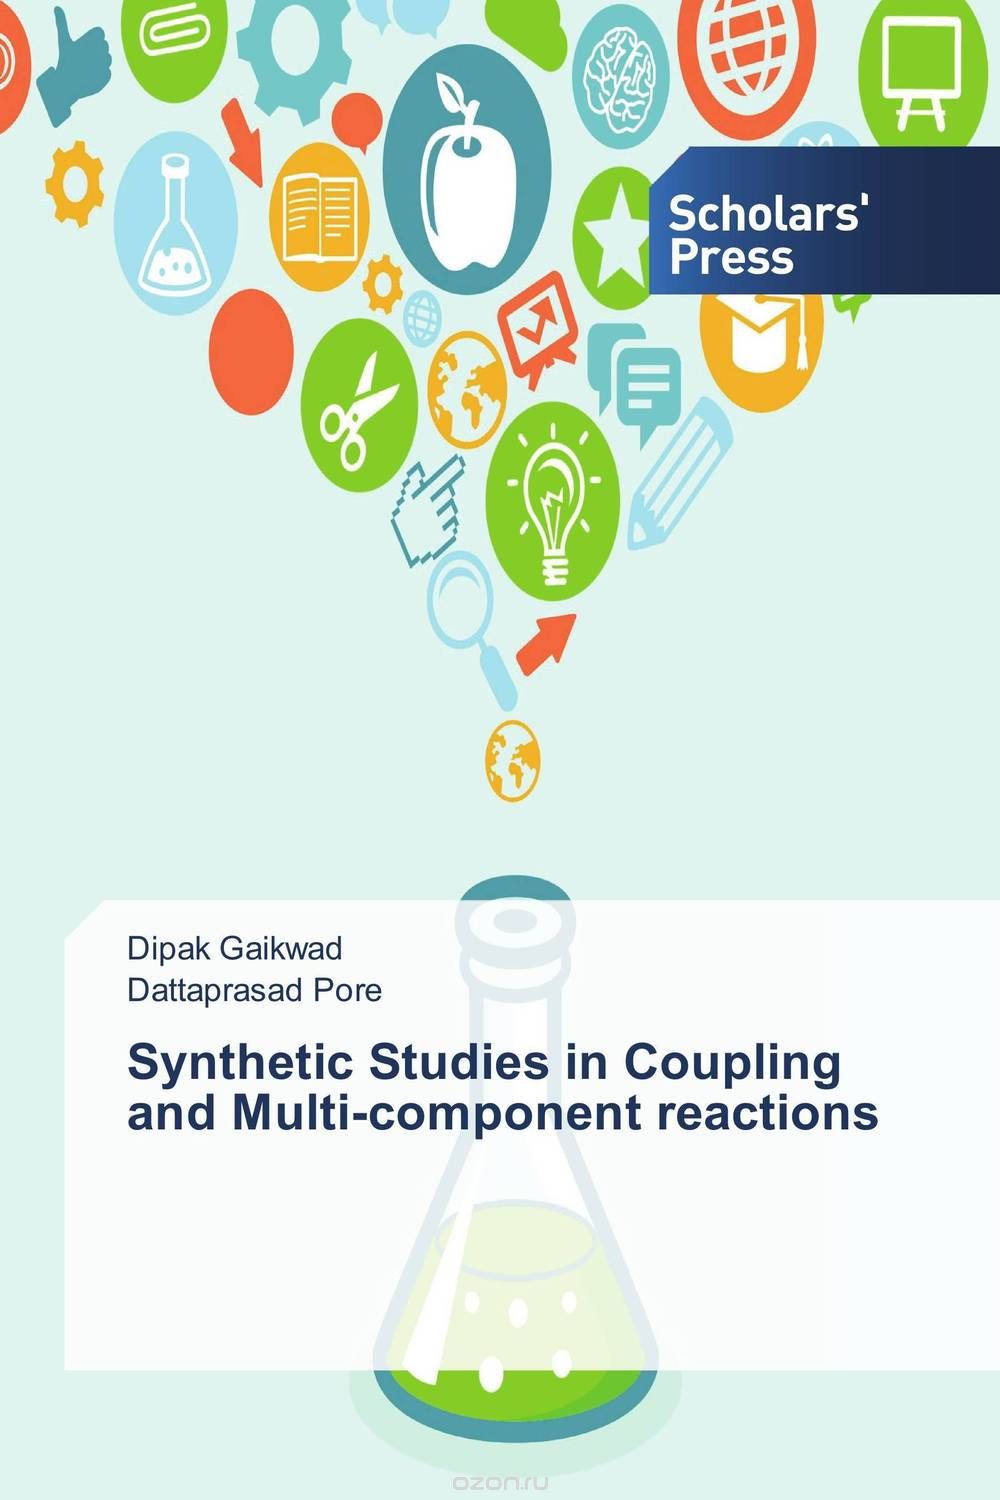 Скачать книгу "Synthetic Studies in Coupling and Multi-component reactions"